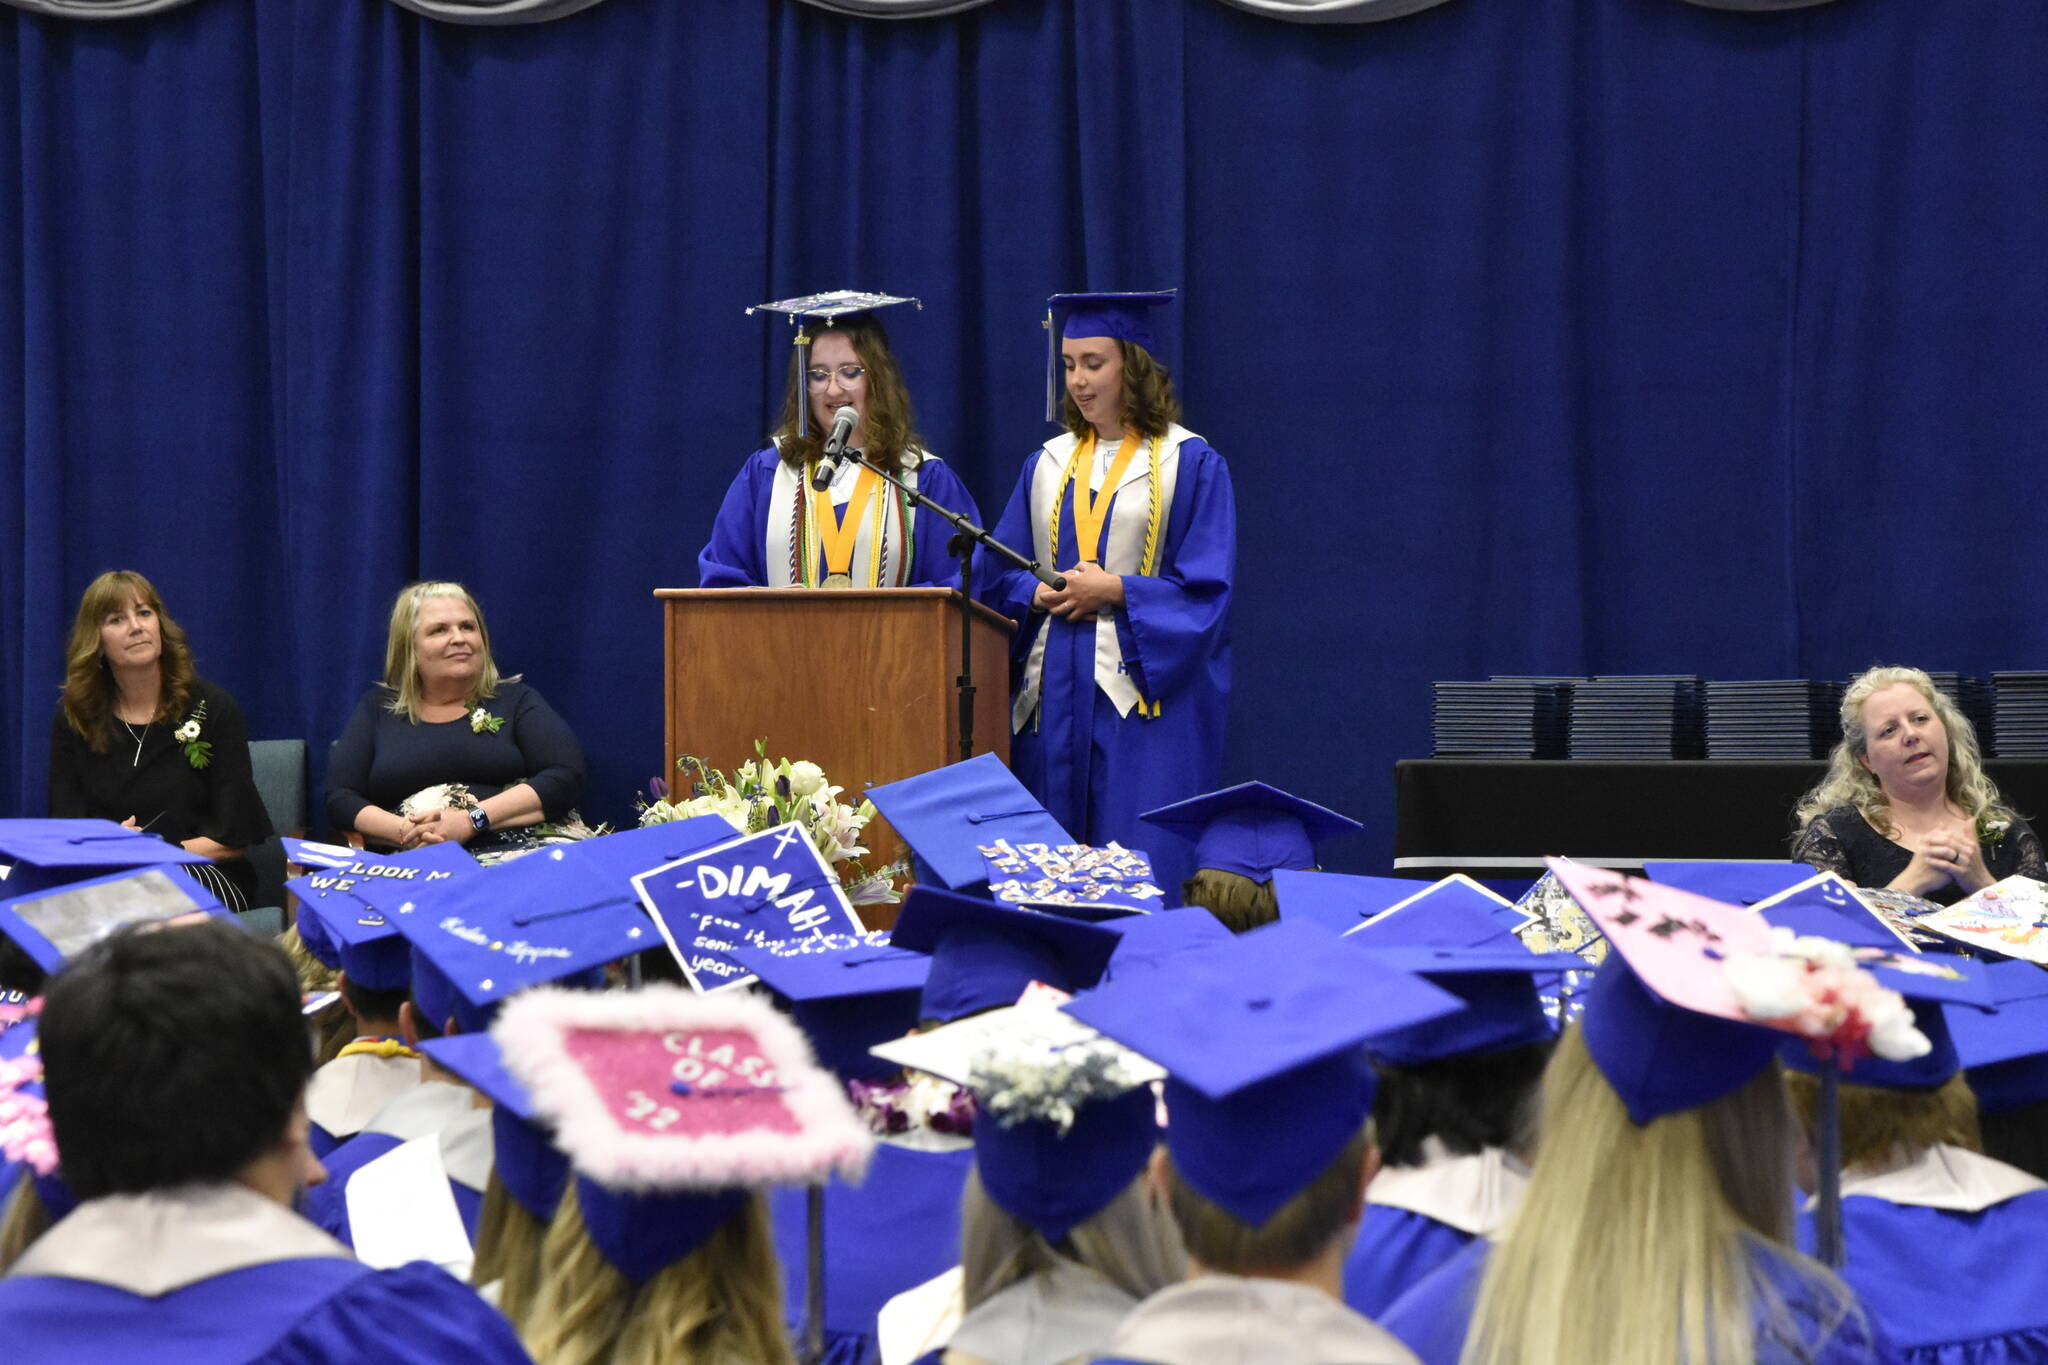 Thunder Mountain High School valedictorians Devin Moorehead, left, and Grace Sikes, deliver remarks to the class of 2022 graduation ceremony on Sunday, May 29, 2022. (Peter Segall / Juneau Empire)